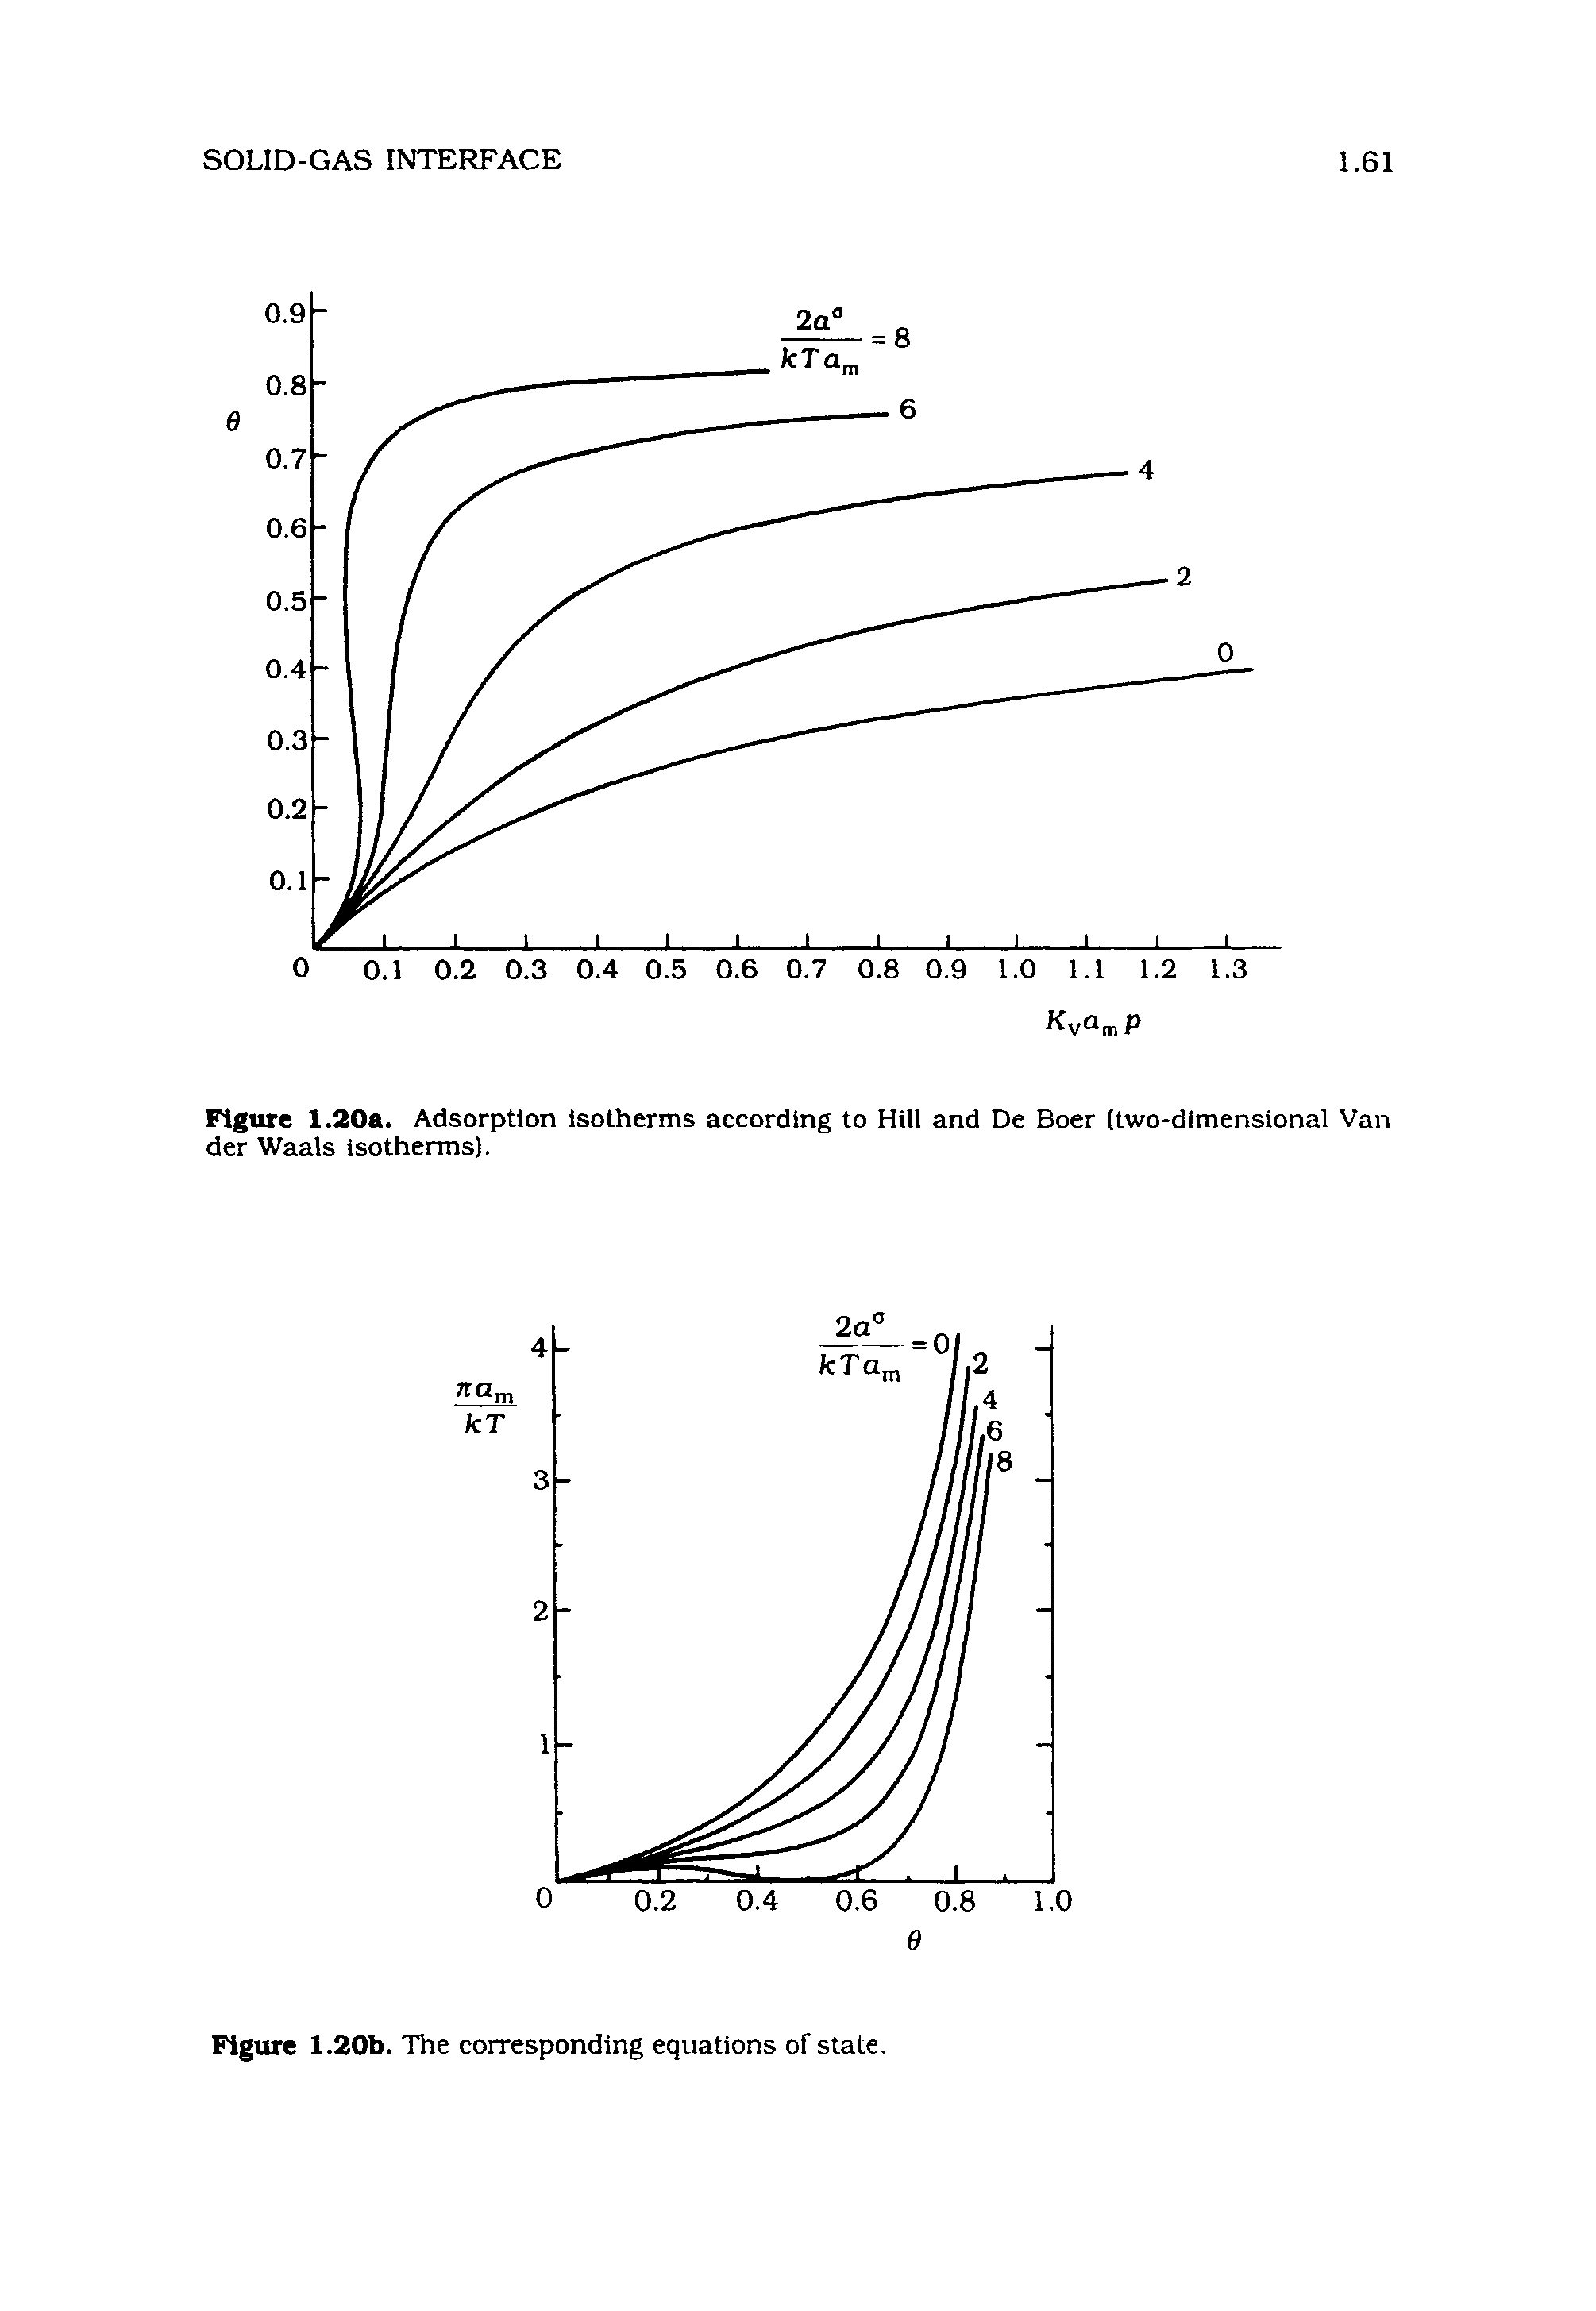 Figure 1.20a. Adsorption isotherms according to Hill and De Boer (two-dimensional Van der Waals Isotherms).